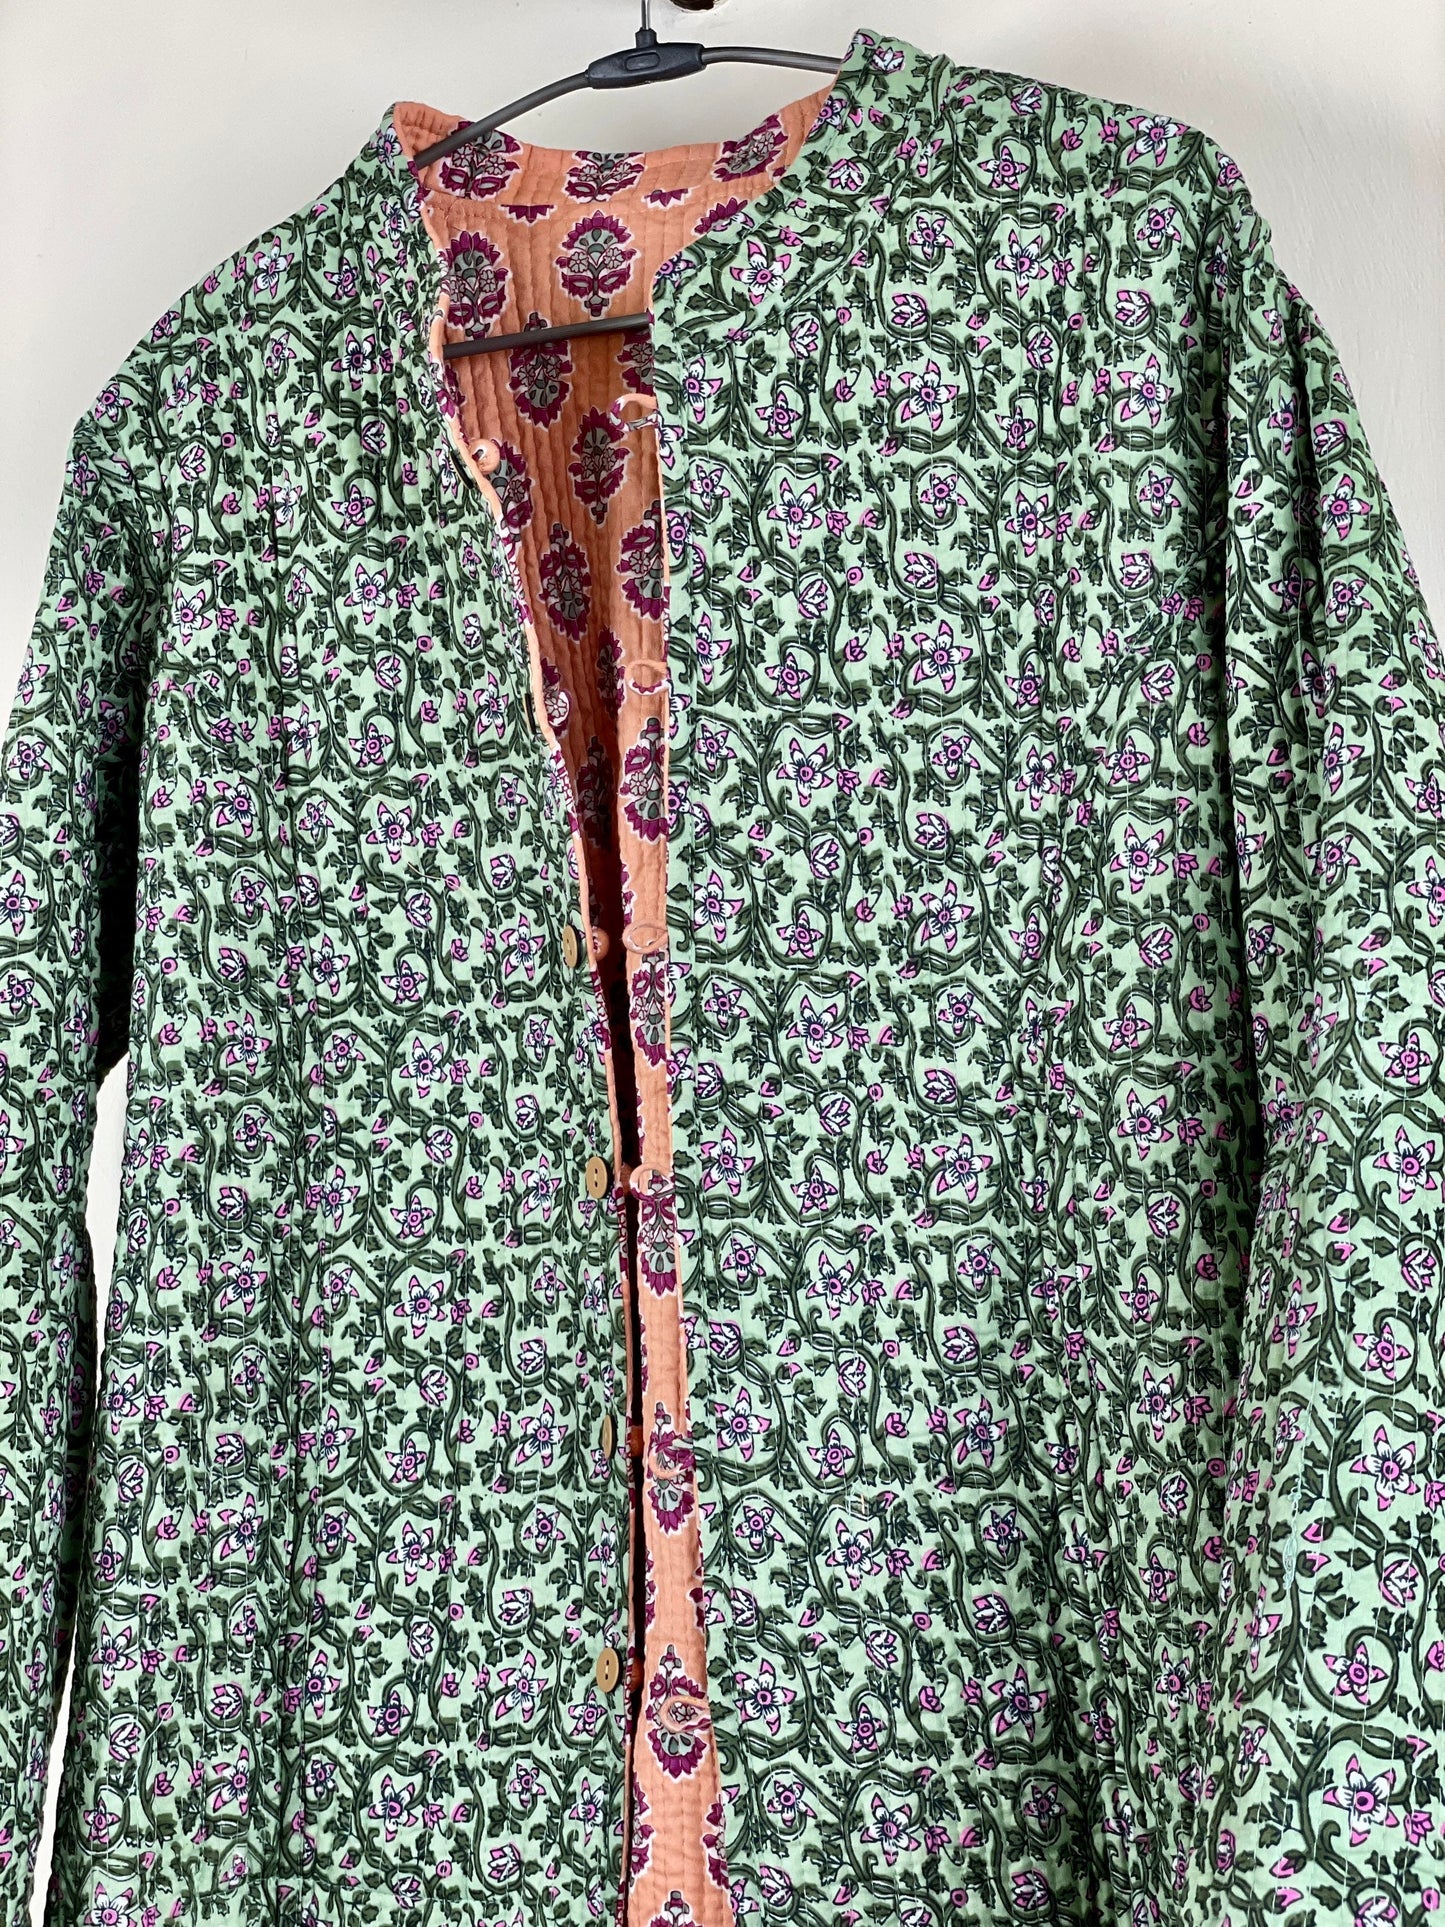 Indian Handmade Quilted Cotton Fabric Jacket Stylish Peach & Green Floral Women's Coat, Reversible Waistcoat for Her